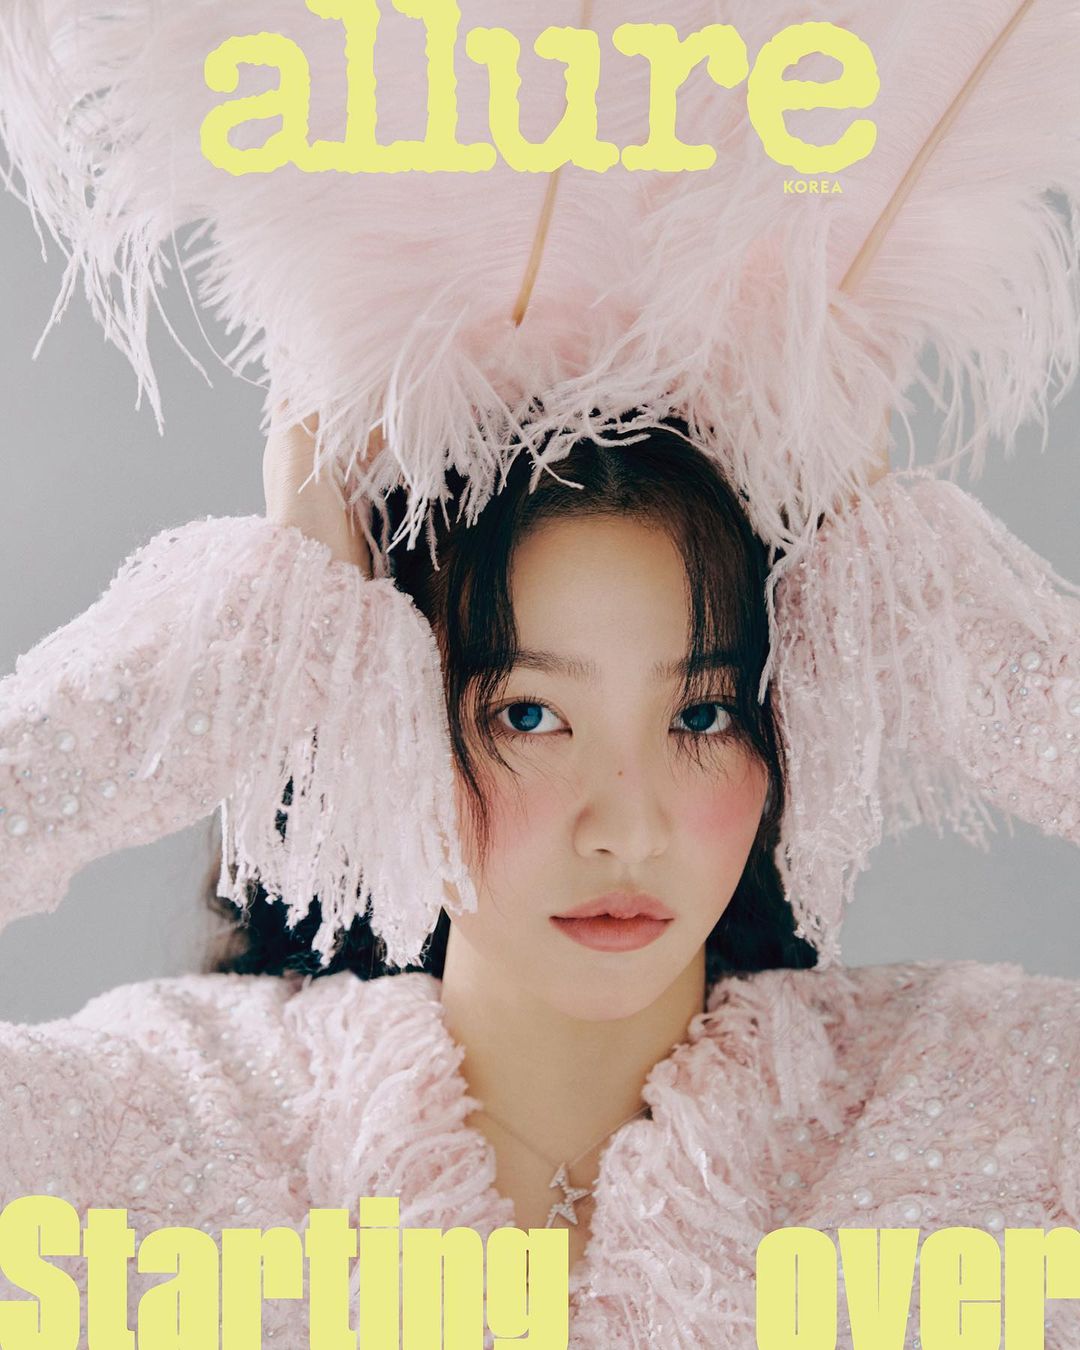 Red Velvet Yeri, wearing a rabbit-reminiscent outfit ahead of the year of the cat in 2023.."My year has finally come"